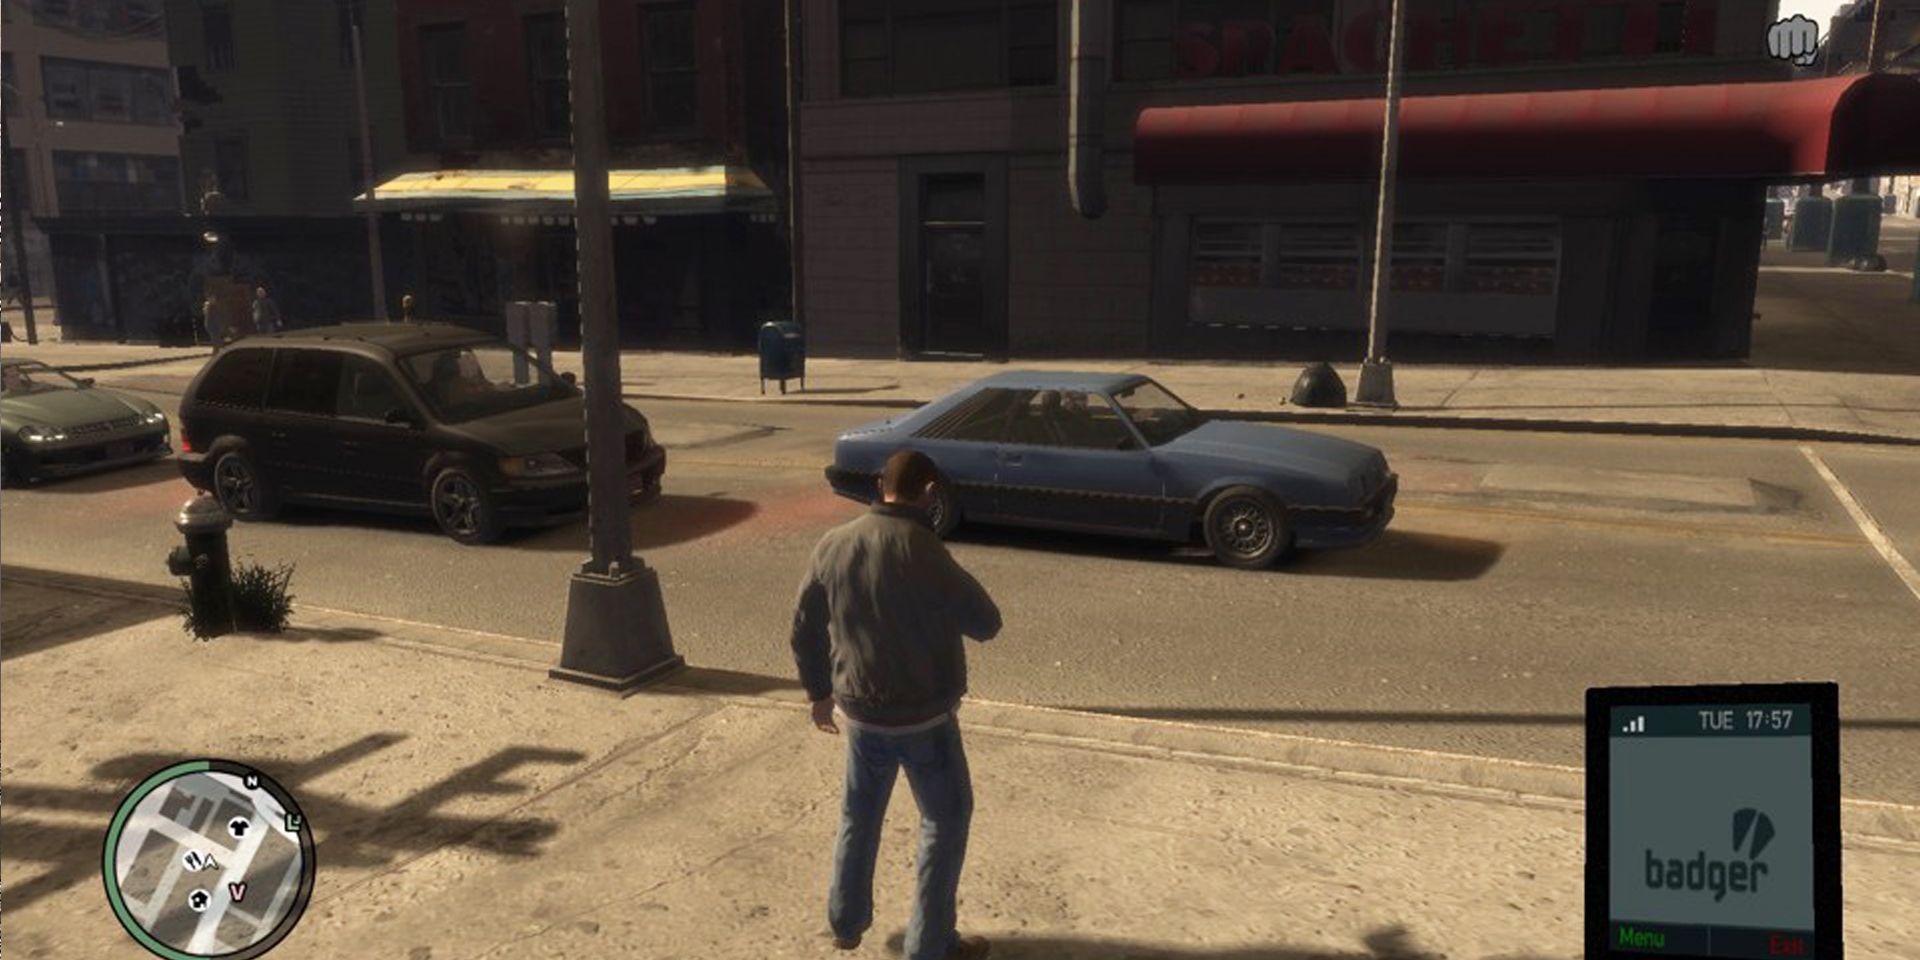 Niko Bellic uses his cell phone.